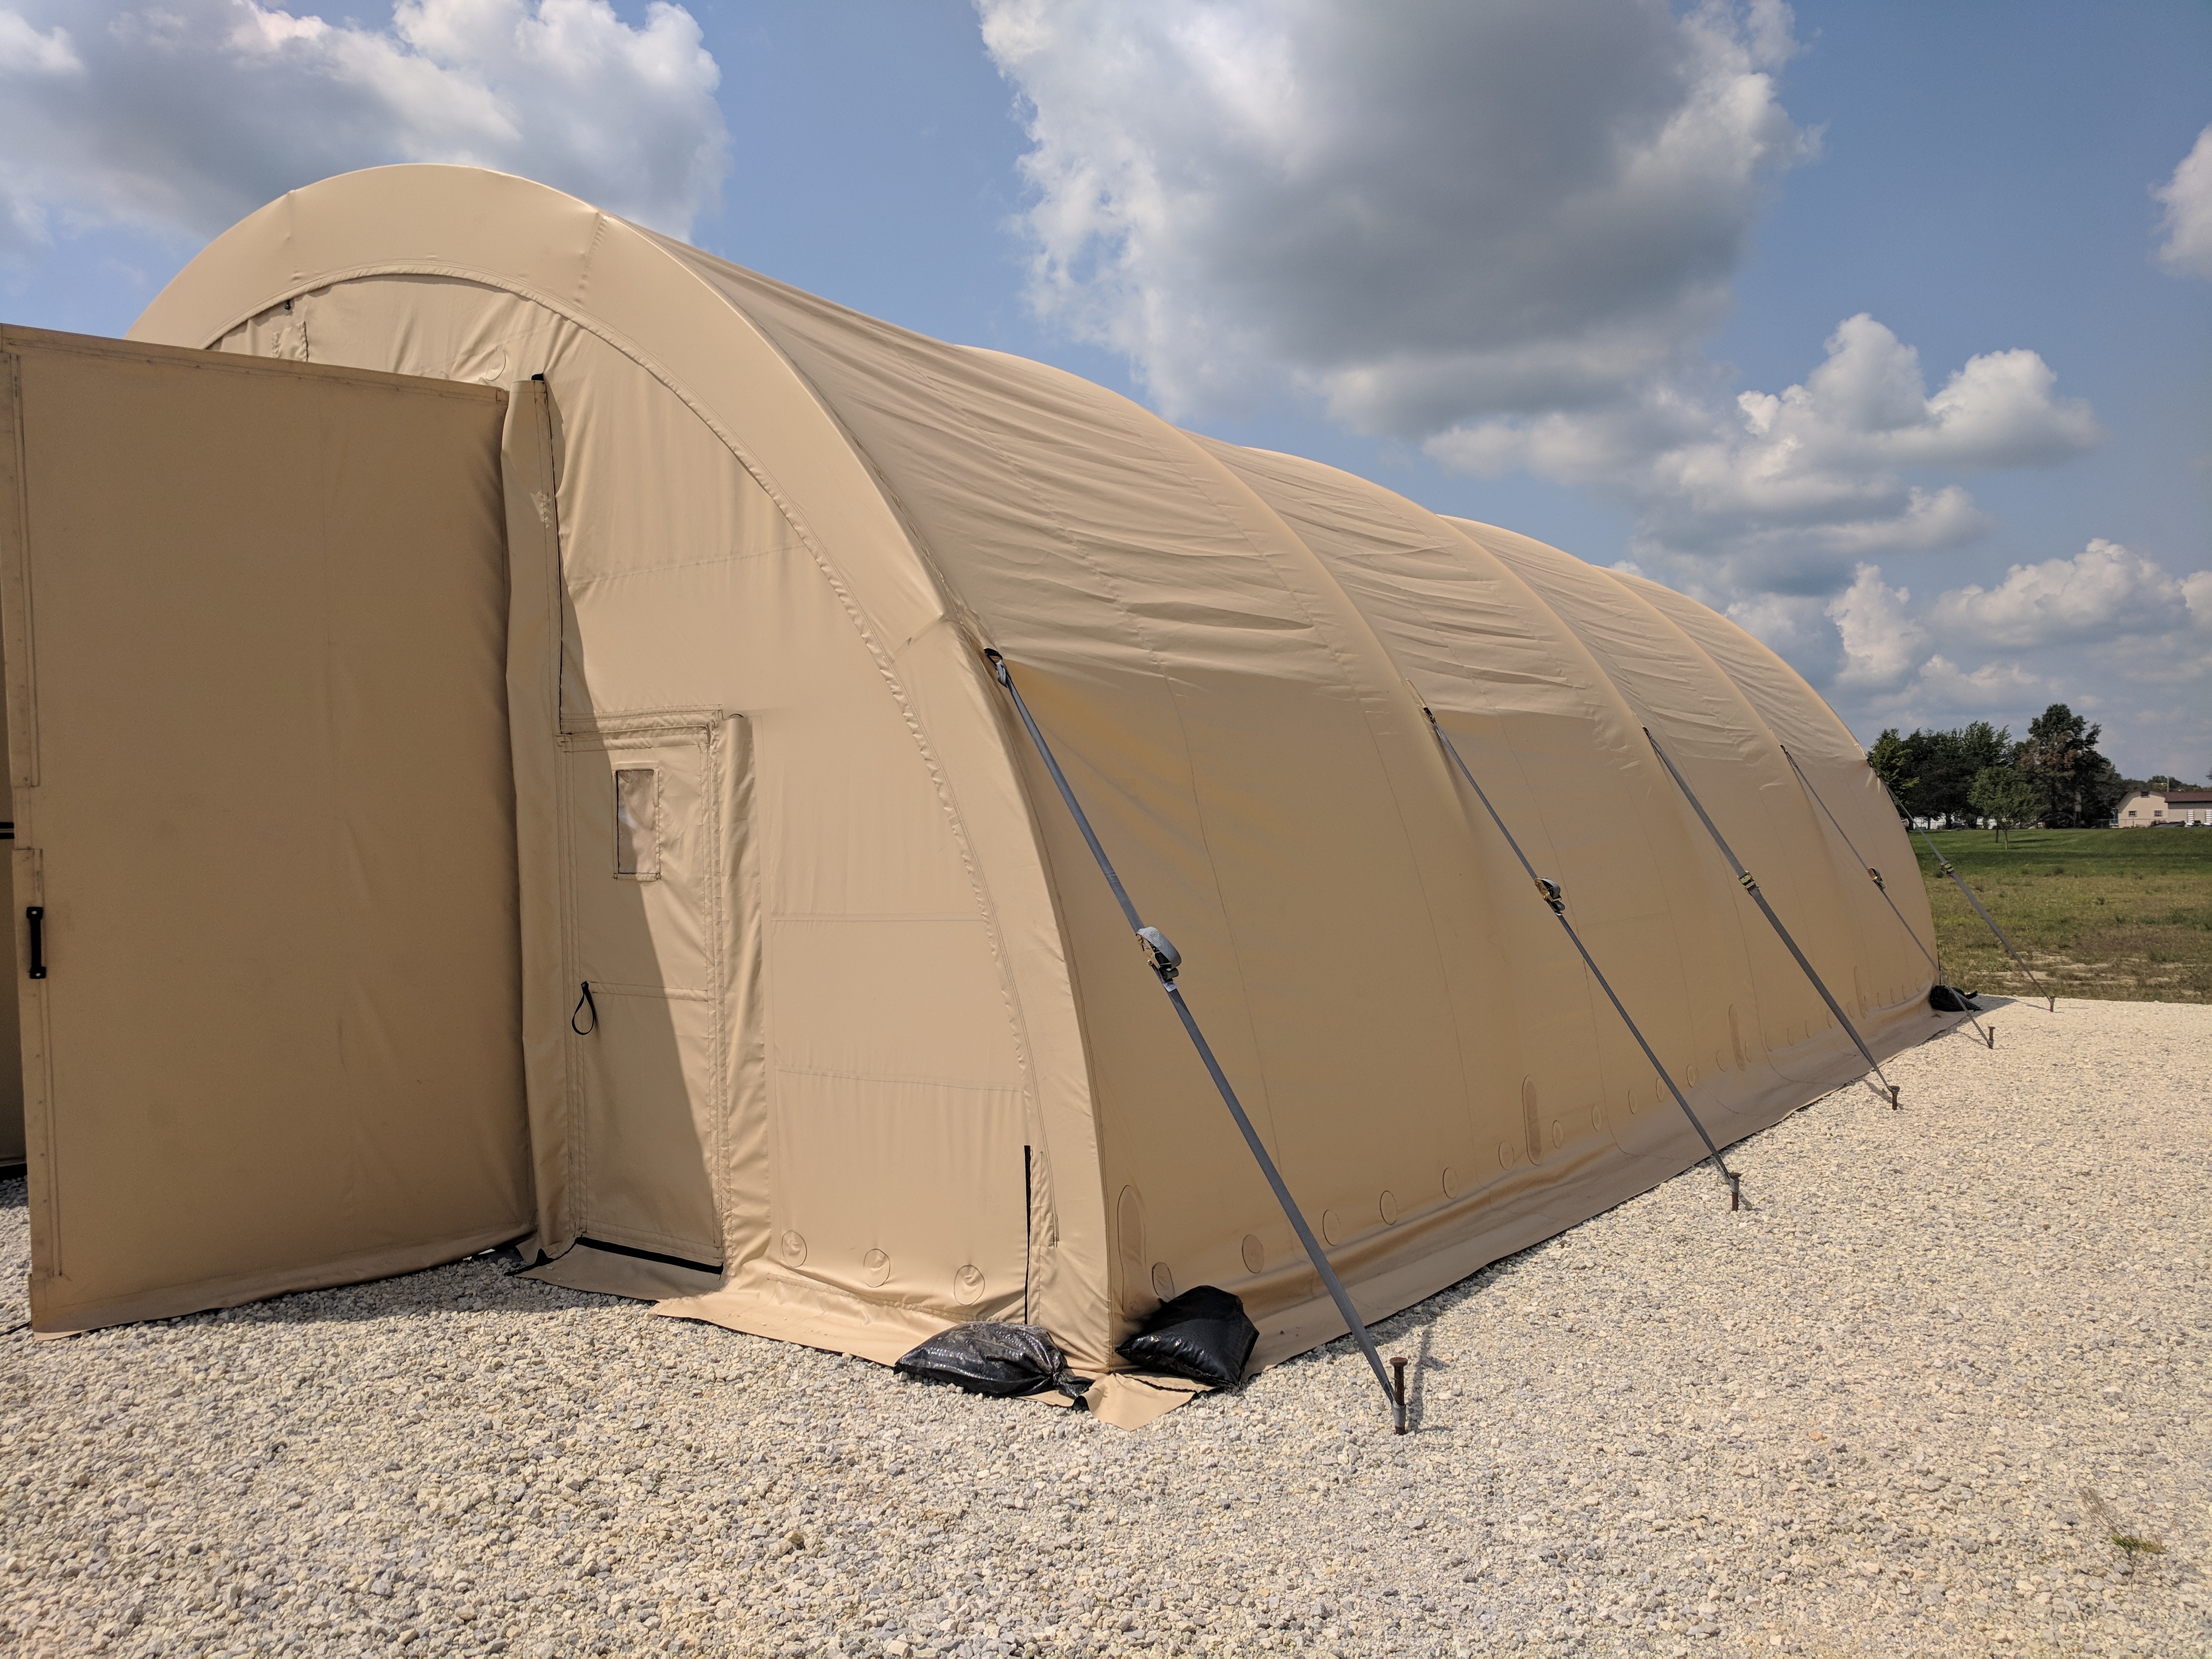 Wel-Fab Inc. Introduces New Line Of Rigid Shelter Systems